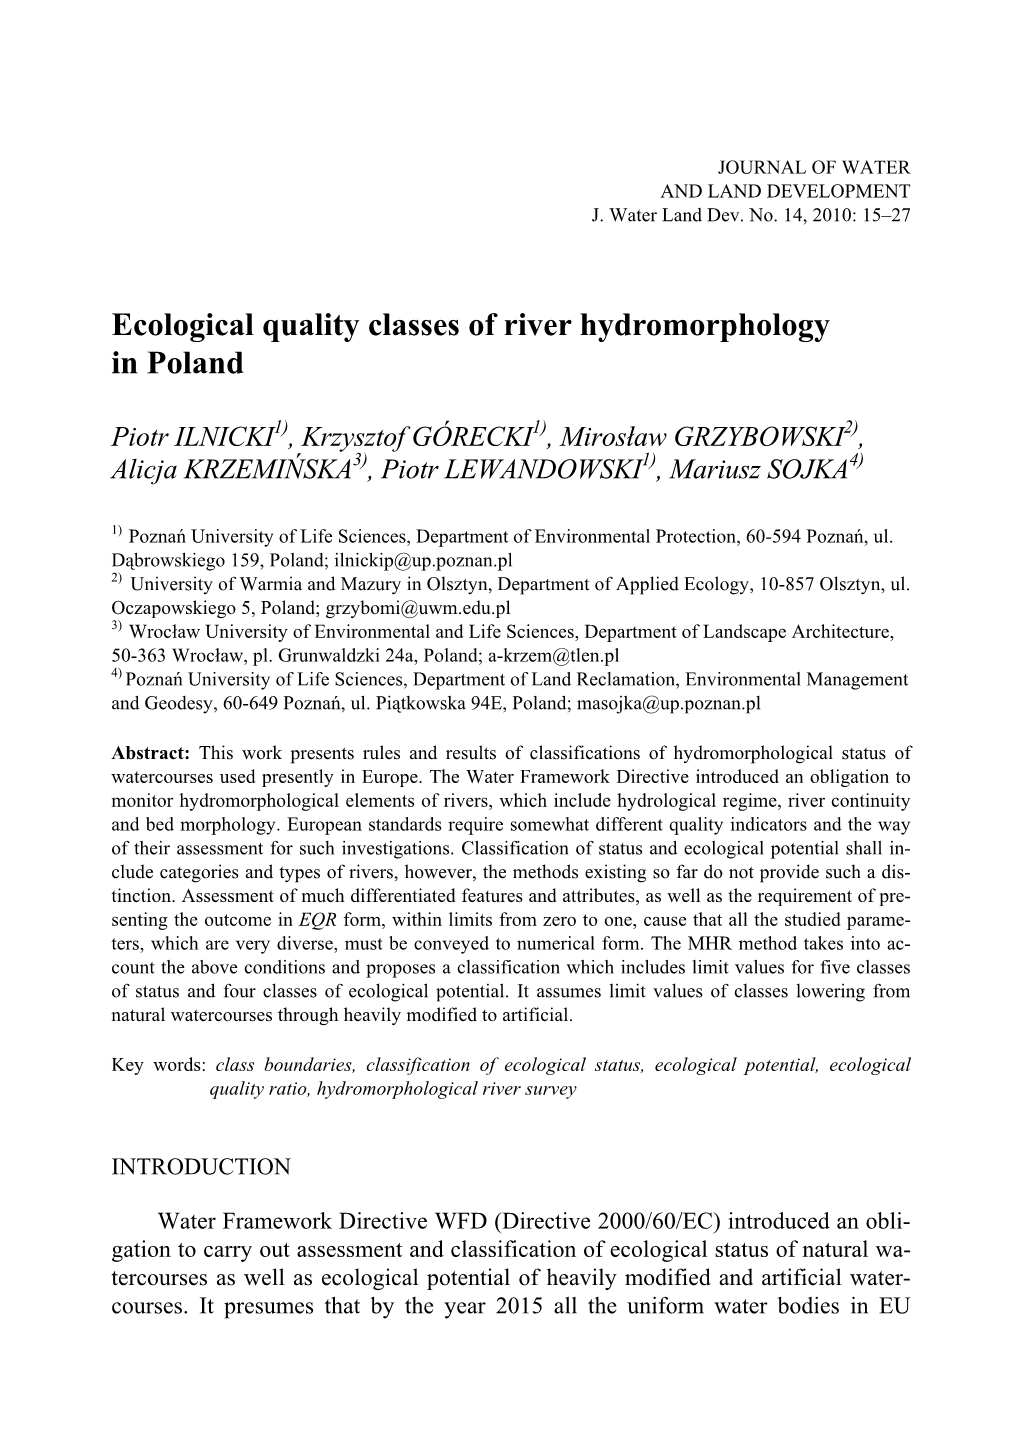 Ecological Quality Classes of River Hydromorphology in Poland